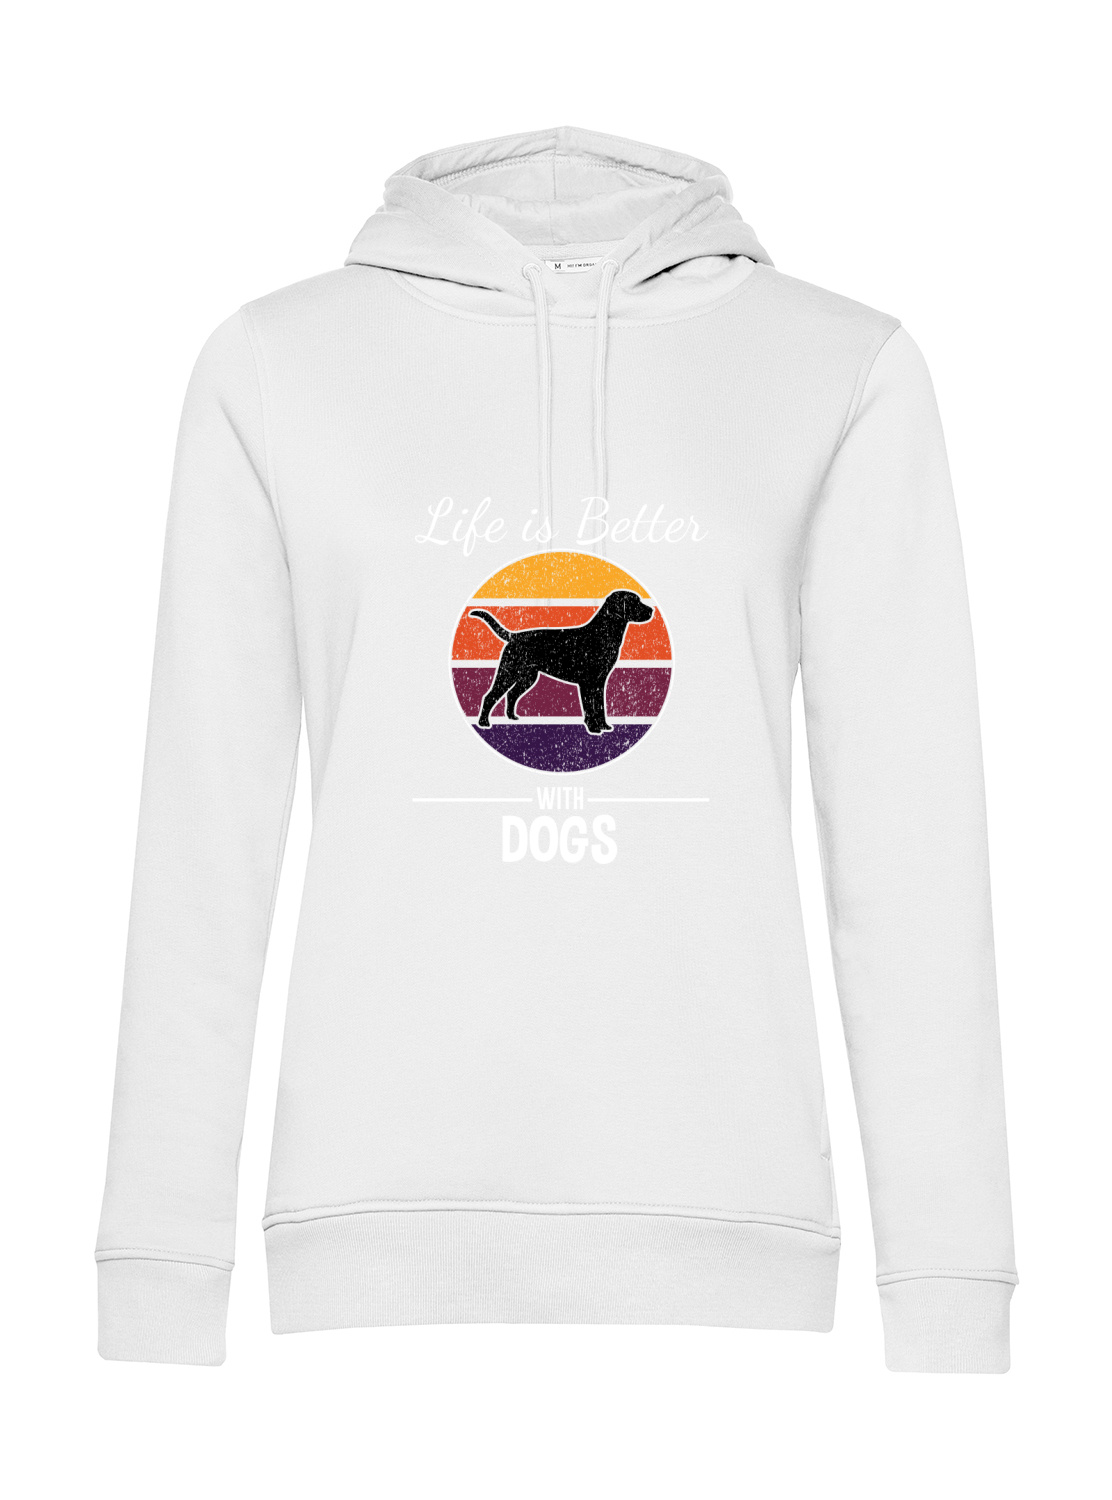 Nachhaltiger Hoodie Damen Hunde - Life is Better with Dogs